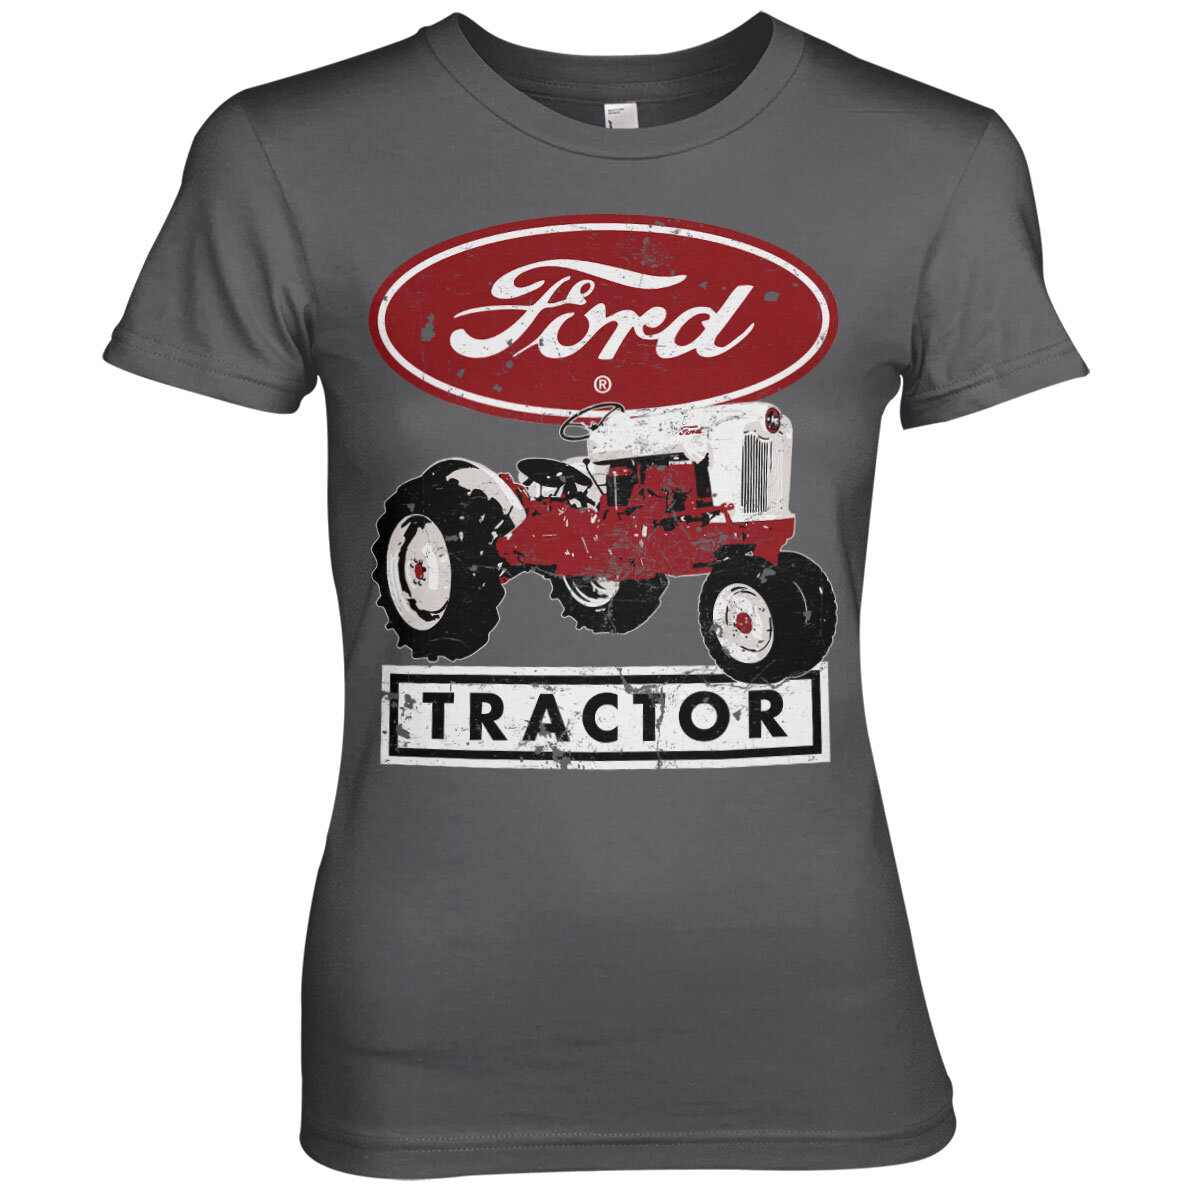 Ford Tractor Girly Tee